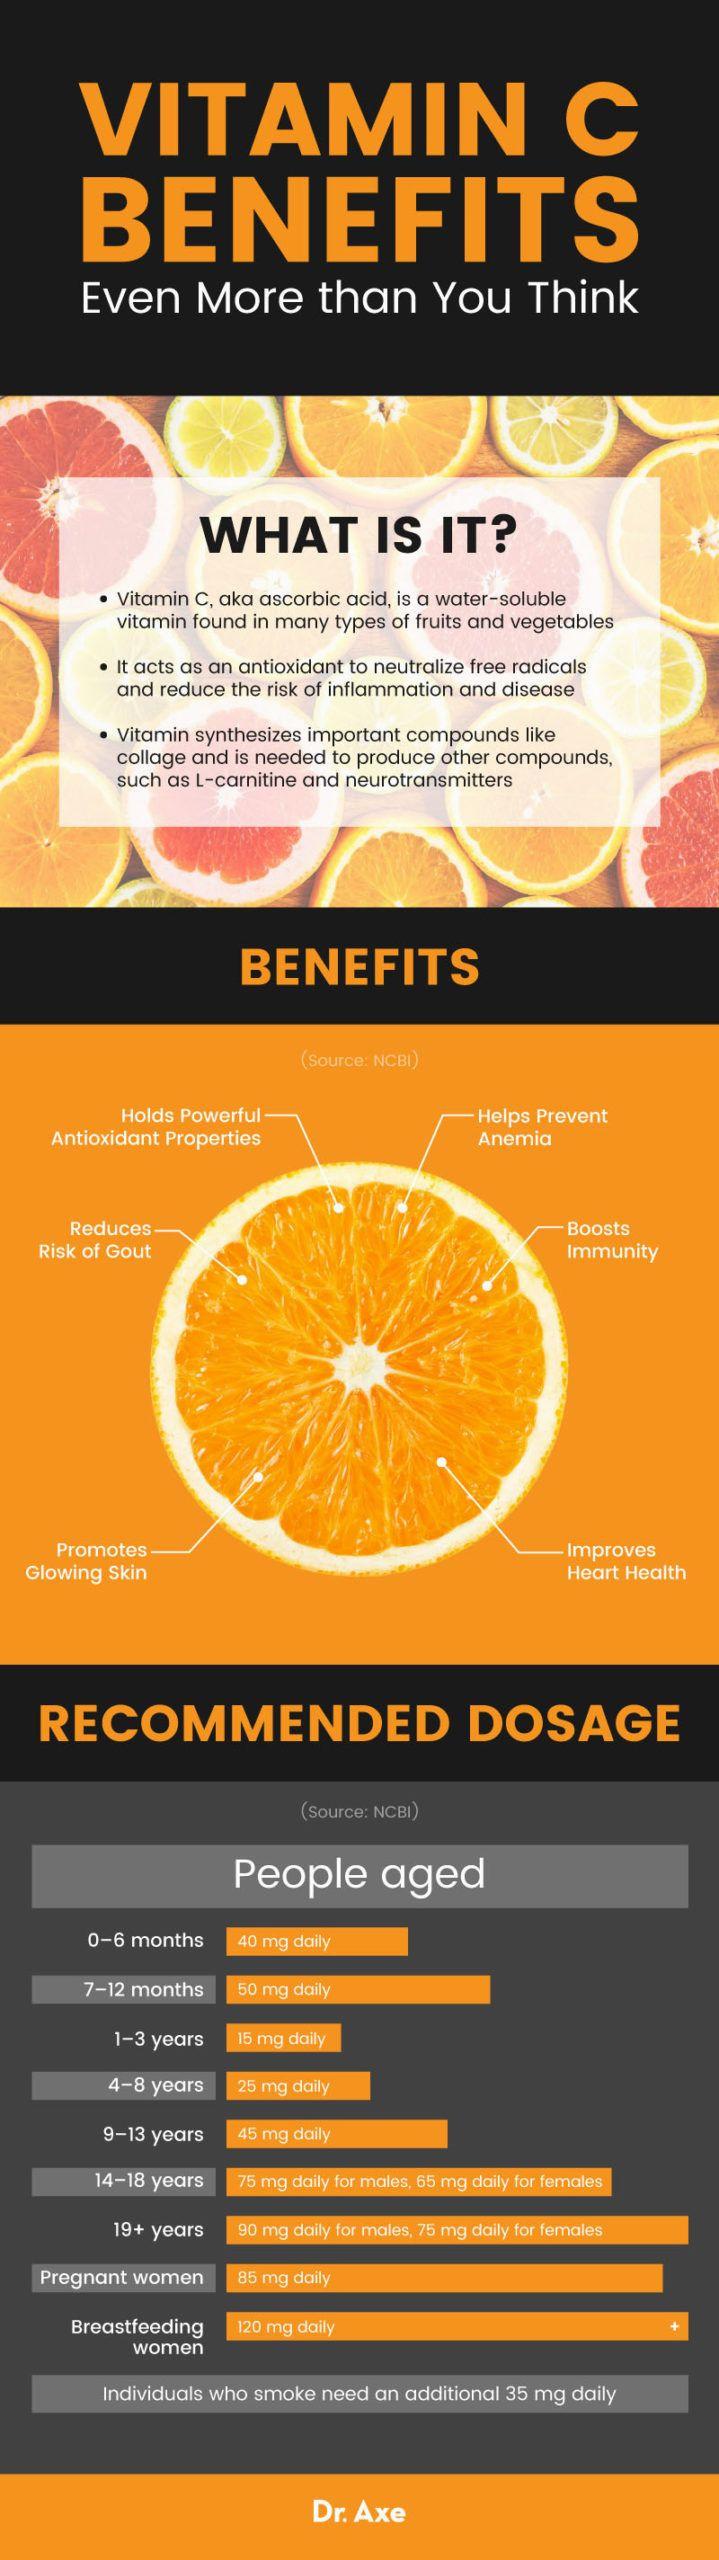 A table of information about vitamin C, including its benefits, and recommended daily dosage for different age groups.